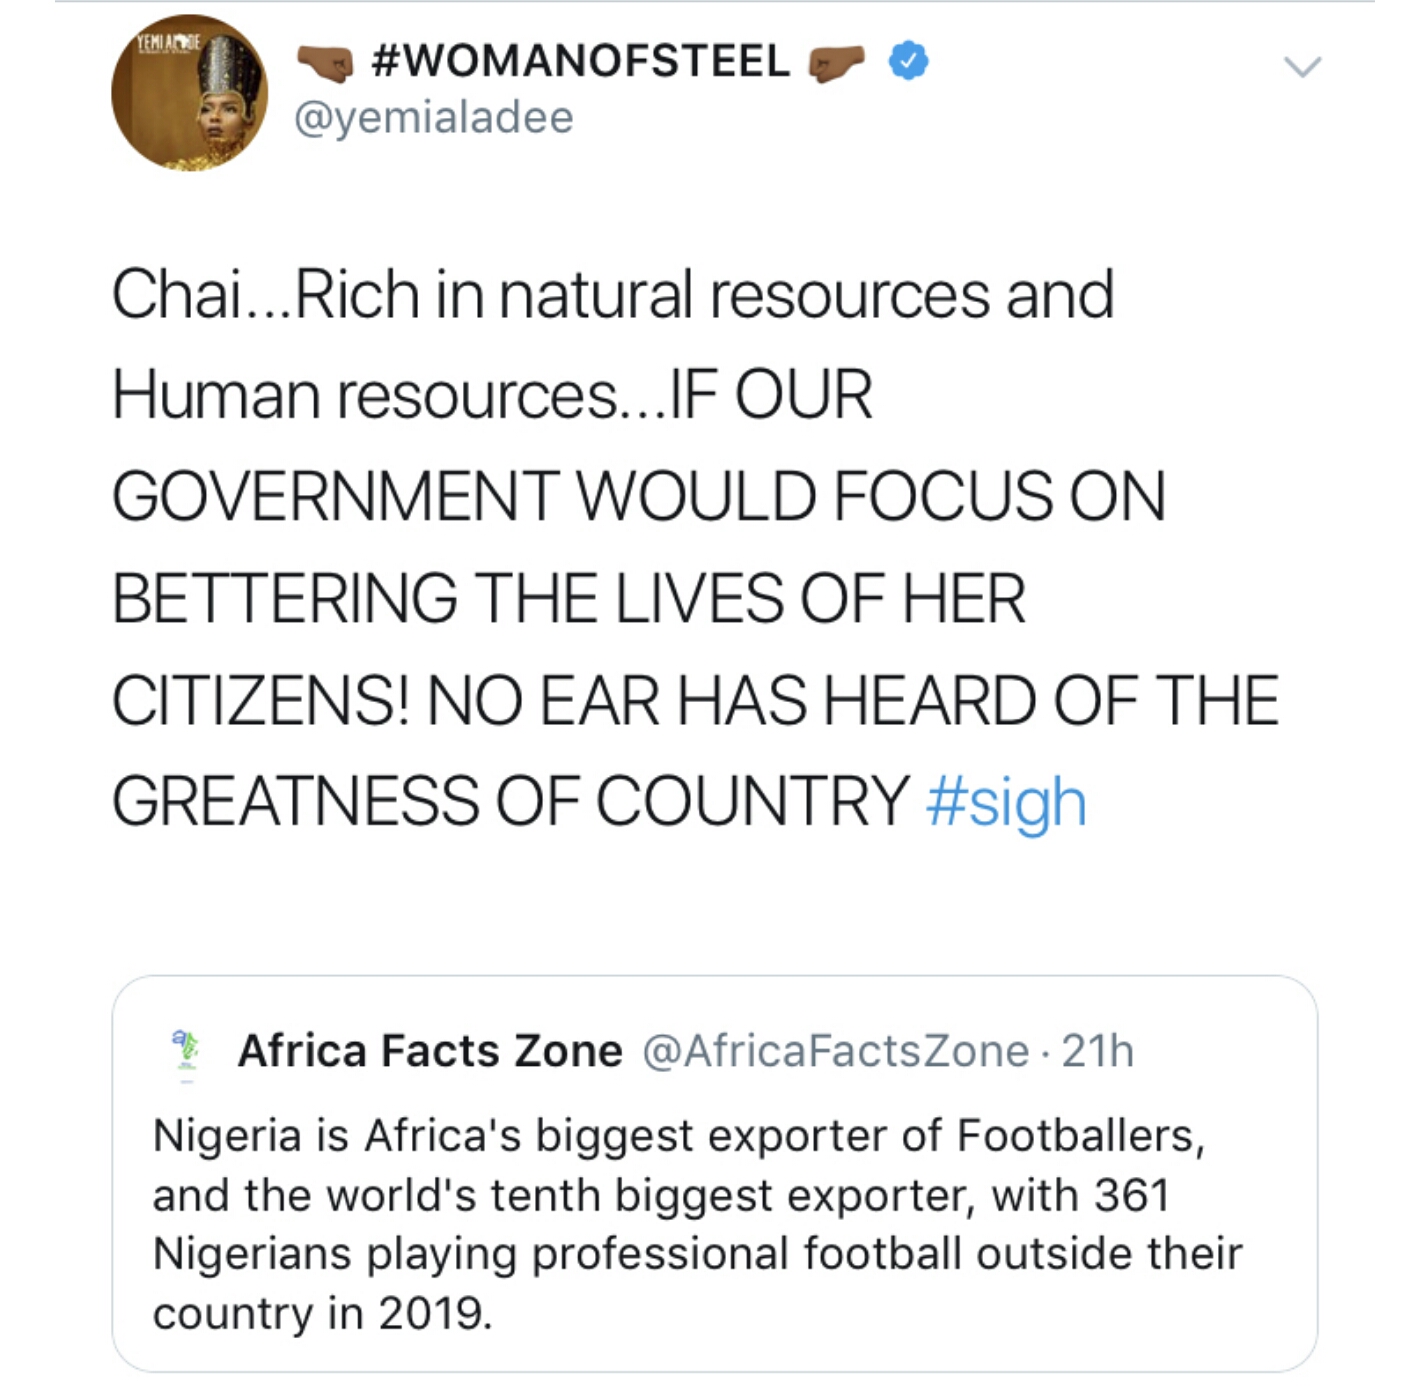 Yemi Alade hits hard at Nigerian Government for not improving lives of citizens after recent positive report about Nigeria